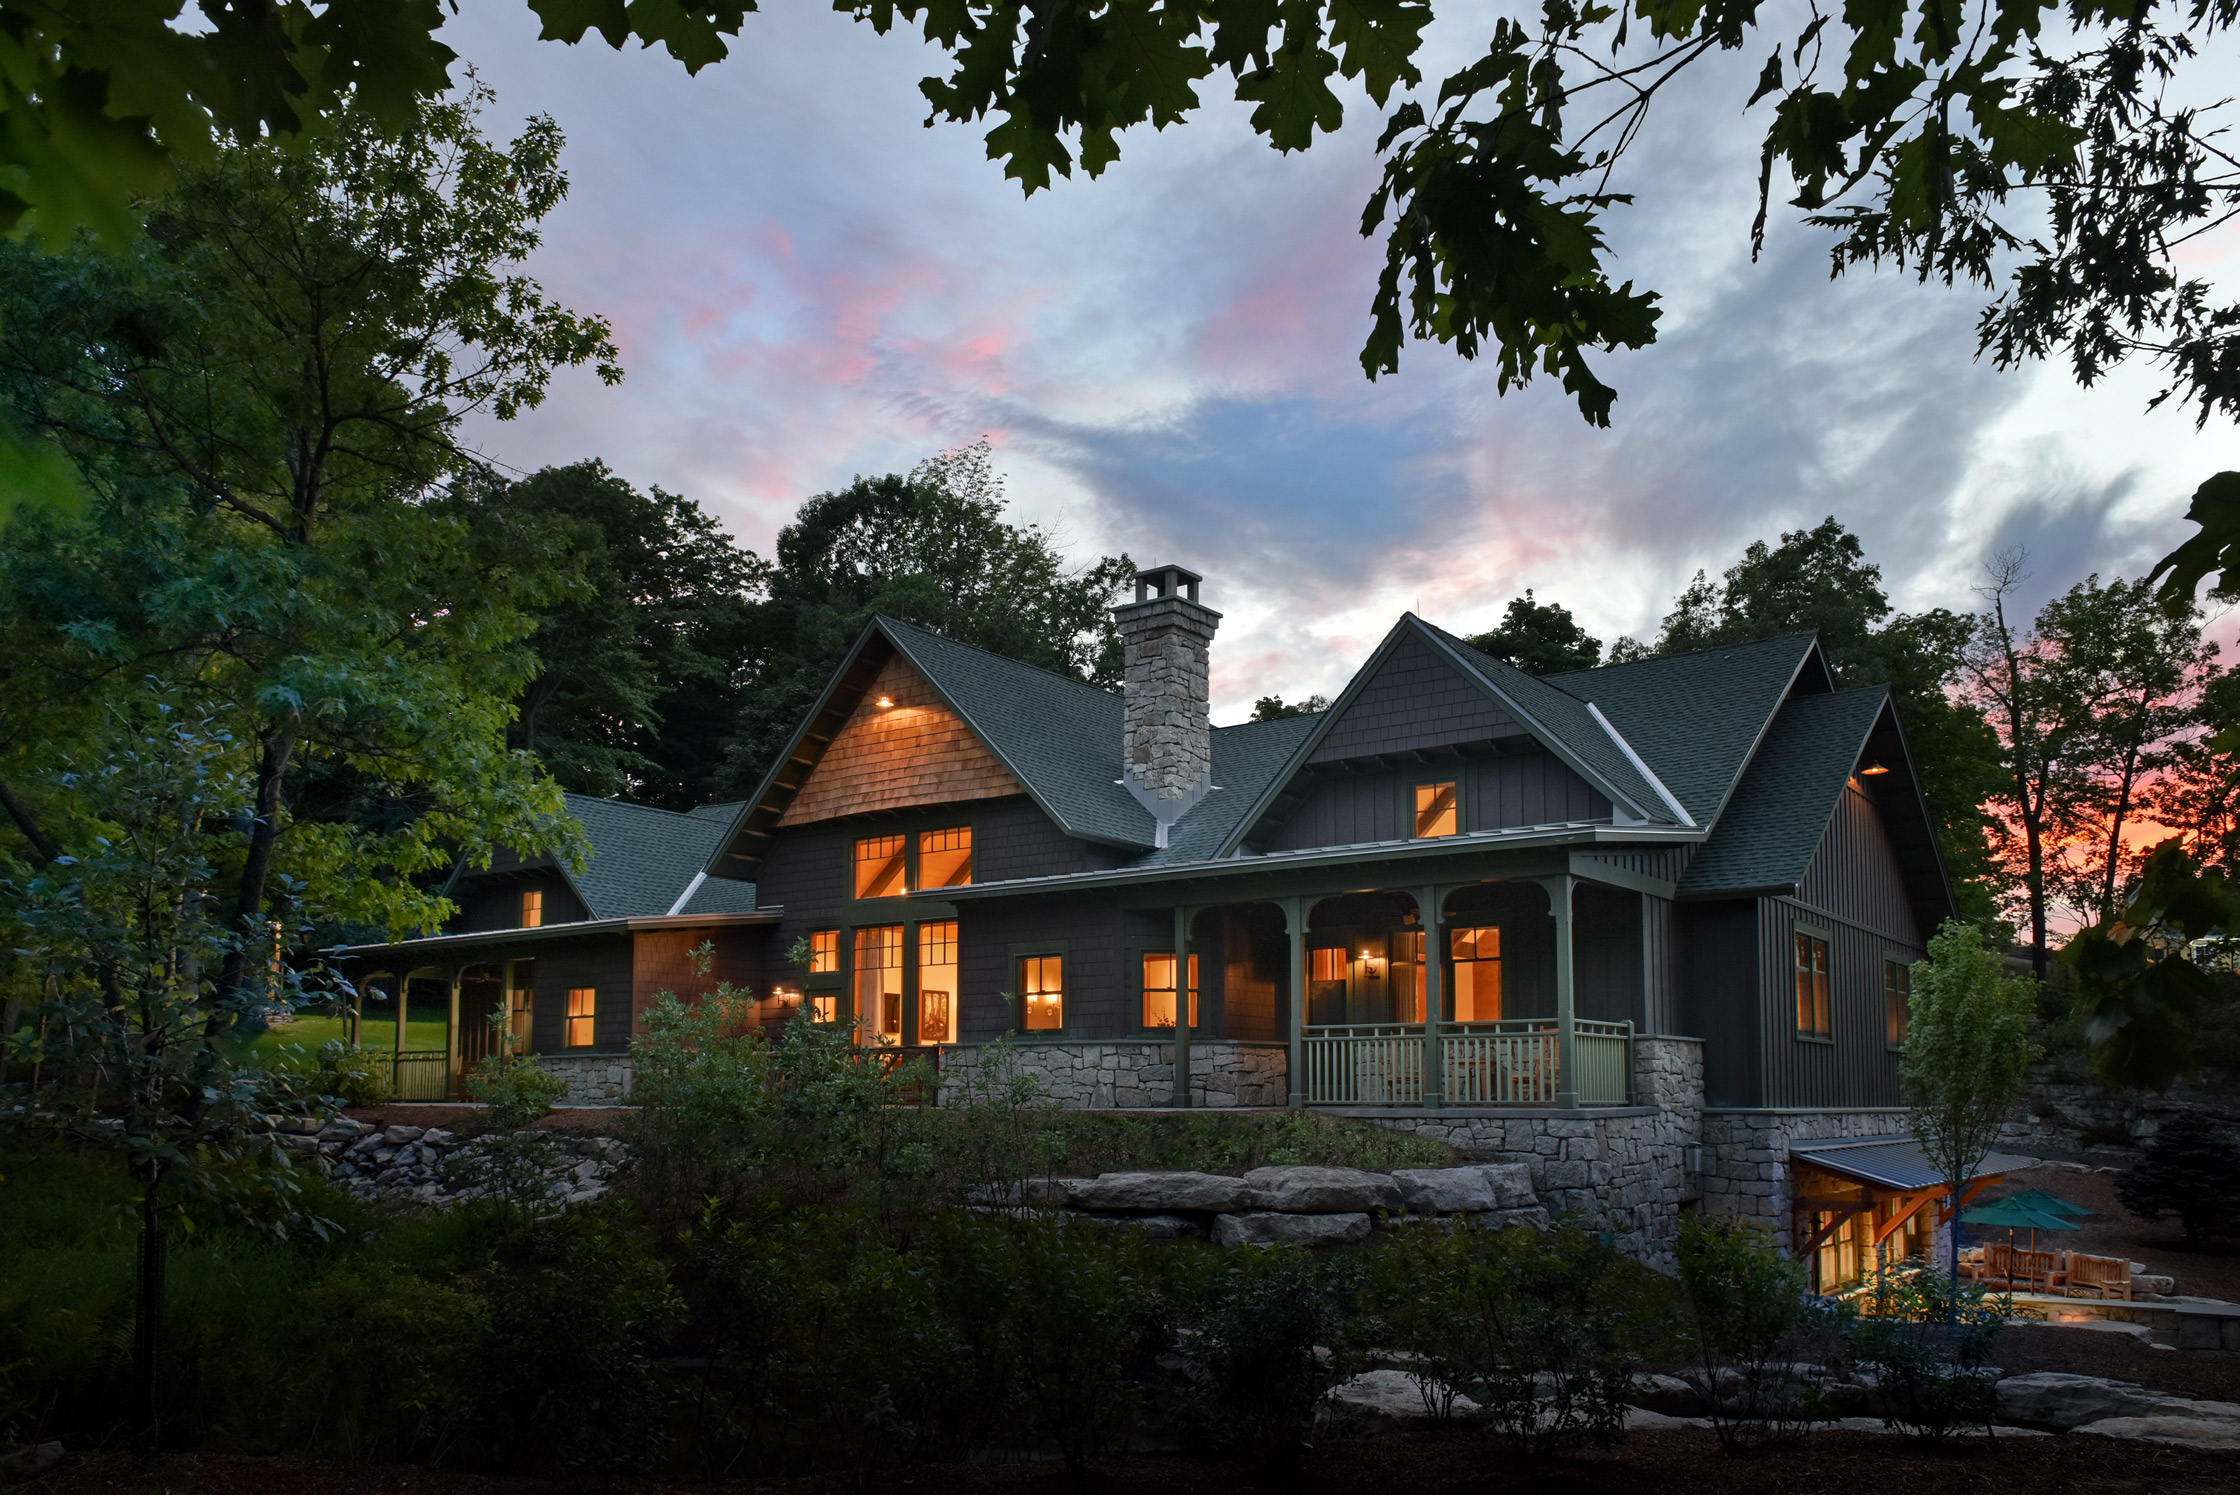 AJA Architecture and Planning designed the Grove Lodge at Mohonk Mountain House. It is the first new lodging building since the turn of the century. 